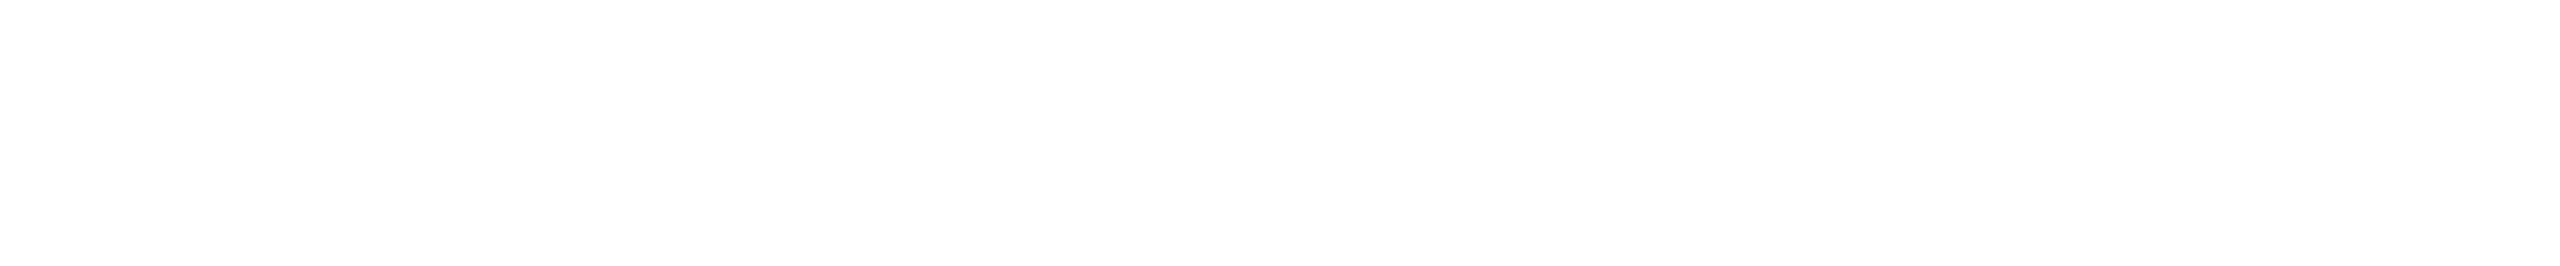 Grammarly - Elevate your writing with Grammarly premium.